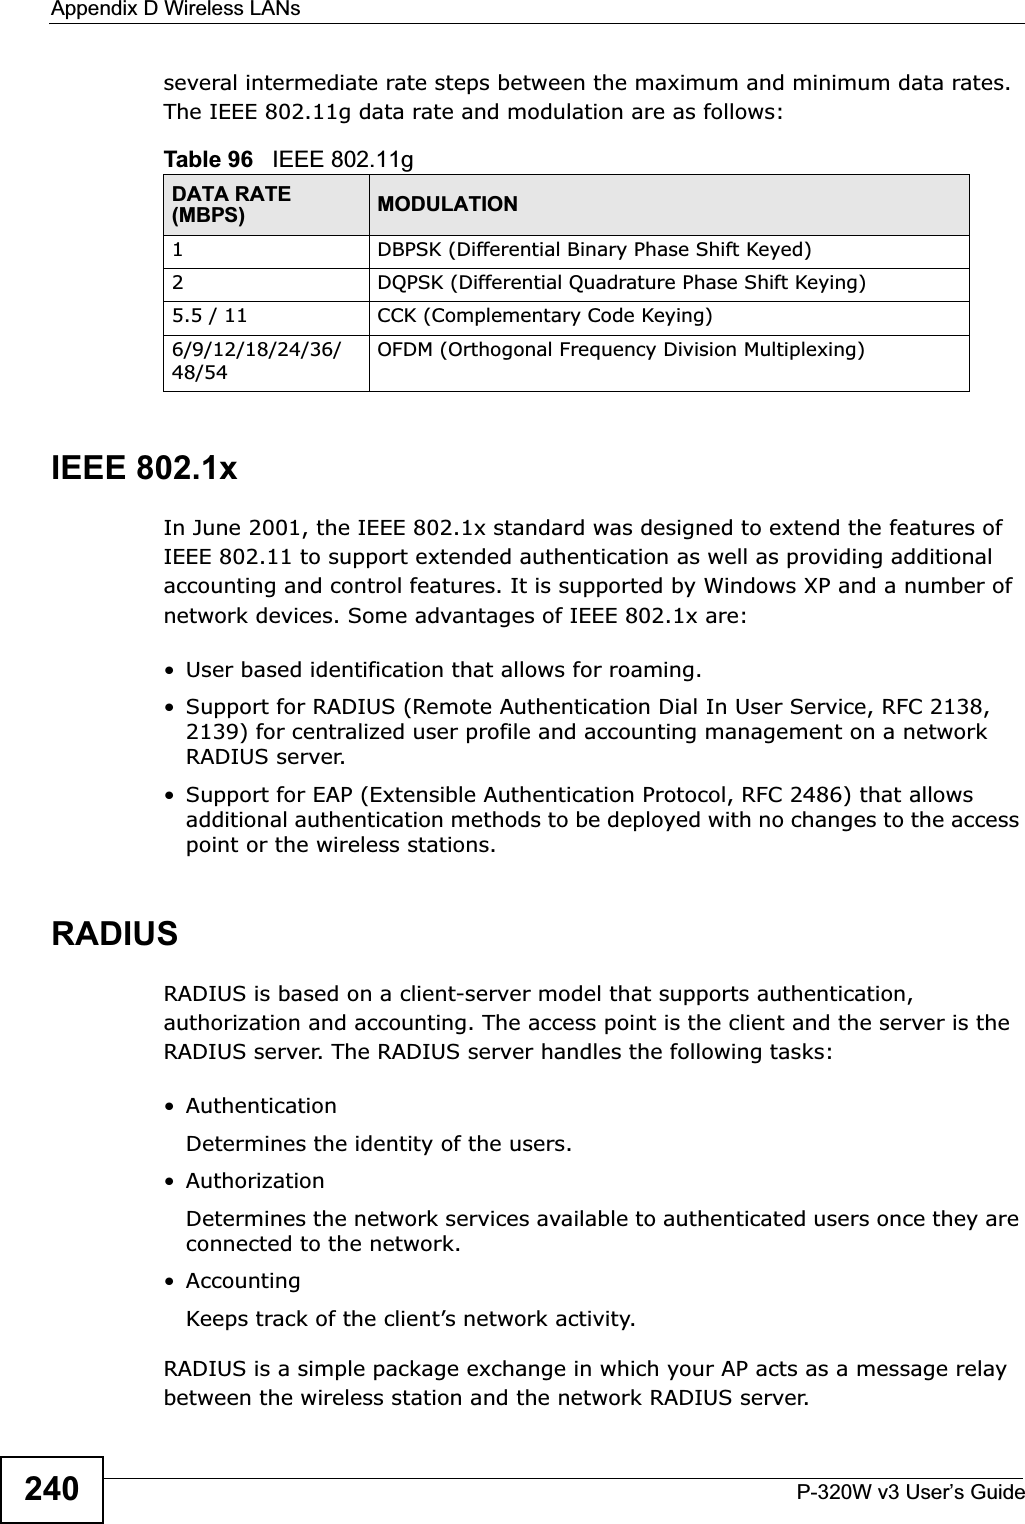 Appendix D Wireless LANsP-320W v3 User’s Guide240several intermediate rate steps between the maximum and minimum data rates. The IEEE 802.11g data rate and modulation are as follows:IEEE 802.1xIn June 2001, the IEEE 802.1x standard was designed to extend the features of IEEE 802.11 to support extended authentication as well as providing additional accounting and control features. It is supported by Windows XP and a number of network devices. Some advantages of IEEE 802.1x are:• User based identification that allows for roaming.• Support for RADIUS (Remote Authentication Dial In User Service, RFC 2138, 2139) for centralized user profile and accounting management on a network RADIUS server. • Support for EAP (Extensible Authentication Protocol, RFC 2486) that allows additional authentication methods to be deployed with no changes to the access point or the wireless stations. RADIUSRADIUS is based on a client-server model that supports authentication, authorization and accounting. The access point is the client and the server is the RADIUS server. The RADIUS server handles the following tasks:• Authentication Determines the identity of the users.• AuthorizationDetermines the network services available to authenticated users once they are connected to the network.•AccountingKeeps track of the client’s network activity. RADIUS is a simple package exchange in which your AP acts as a message relay between the wireless station and the network RADIUS server. Table 96   IEEE 802.11gDATA RATE (MBPS) MODULATION1 DBPSK (Differential Binary Phase Shift Keyed)2 DQPSK (Differential Quadrature Phase Shift Keying)5.5 / 11 CCK (Complementary Code Keying) 6/9/12/18/24/36/48/54OFDM (Orthogonal Frequency Division Multiplexing) 